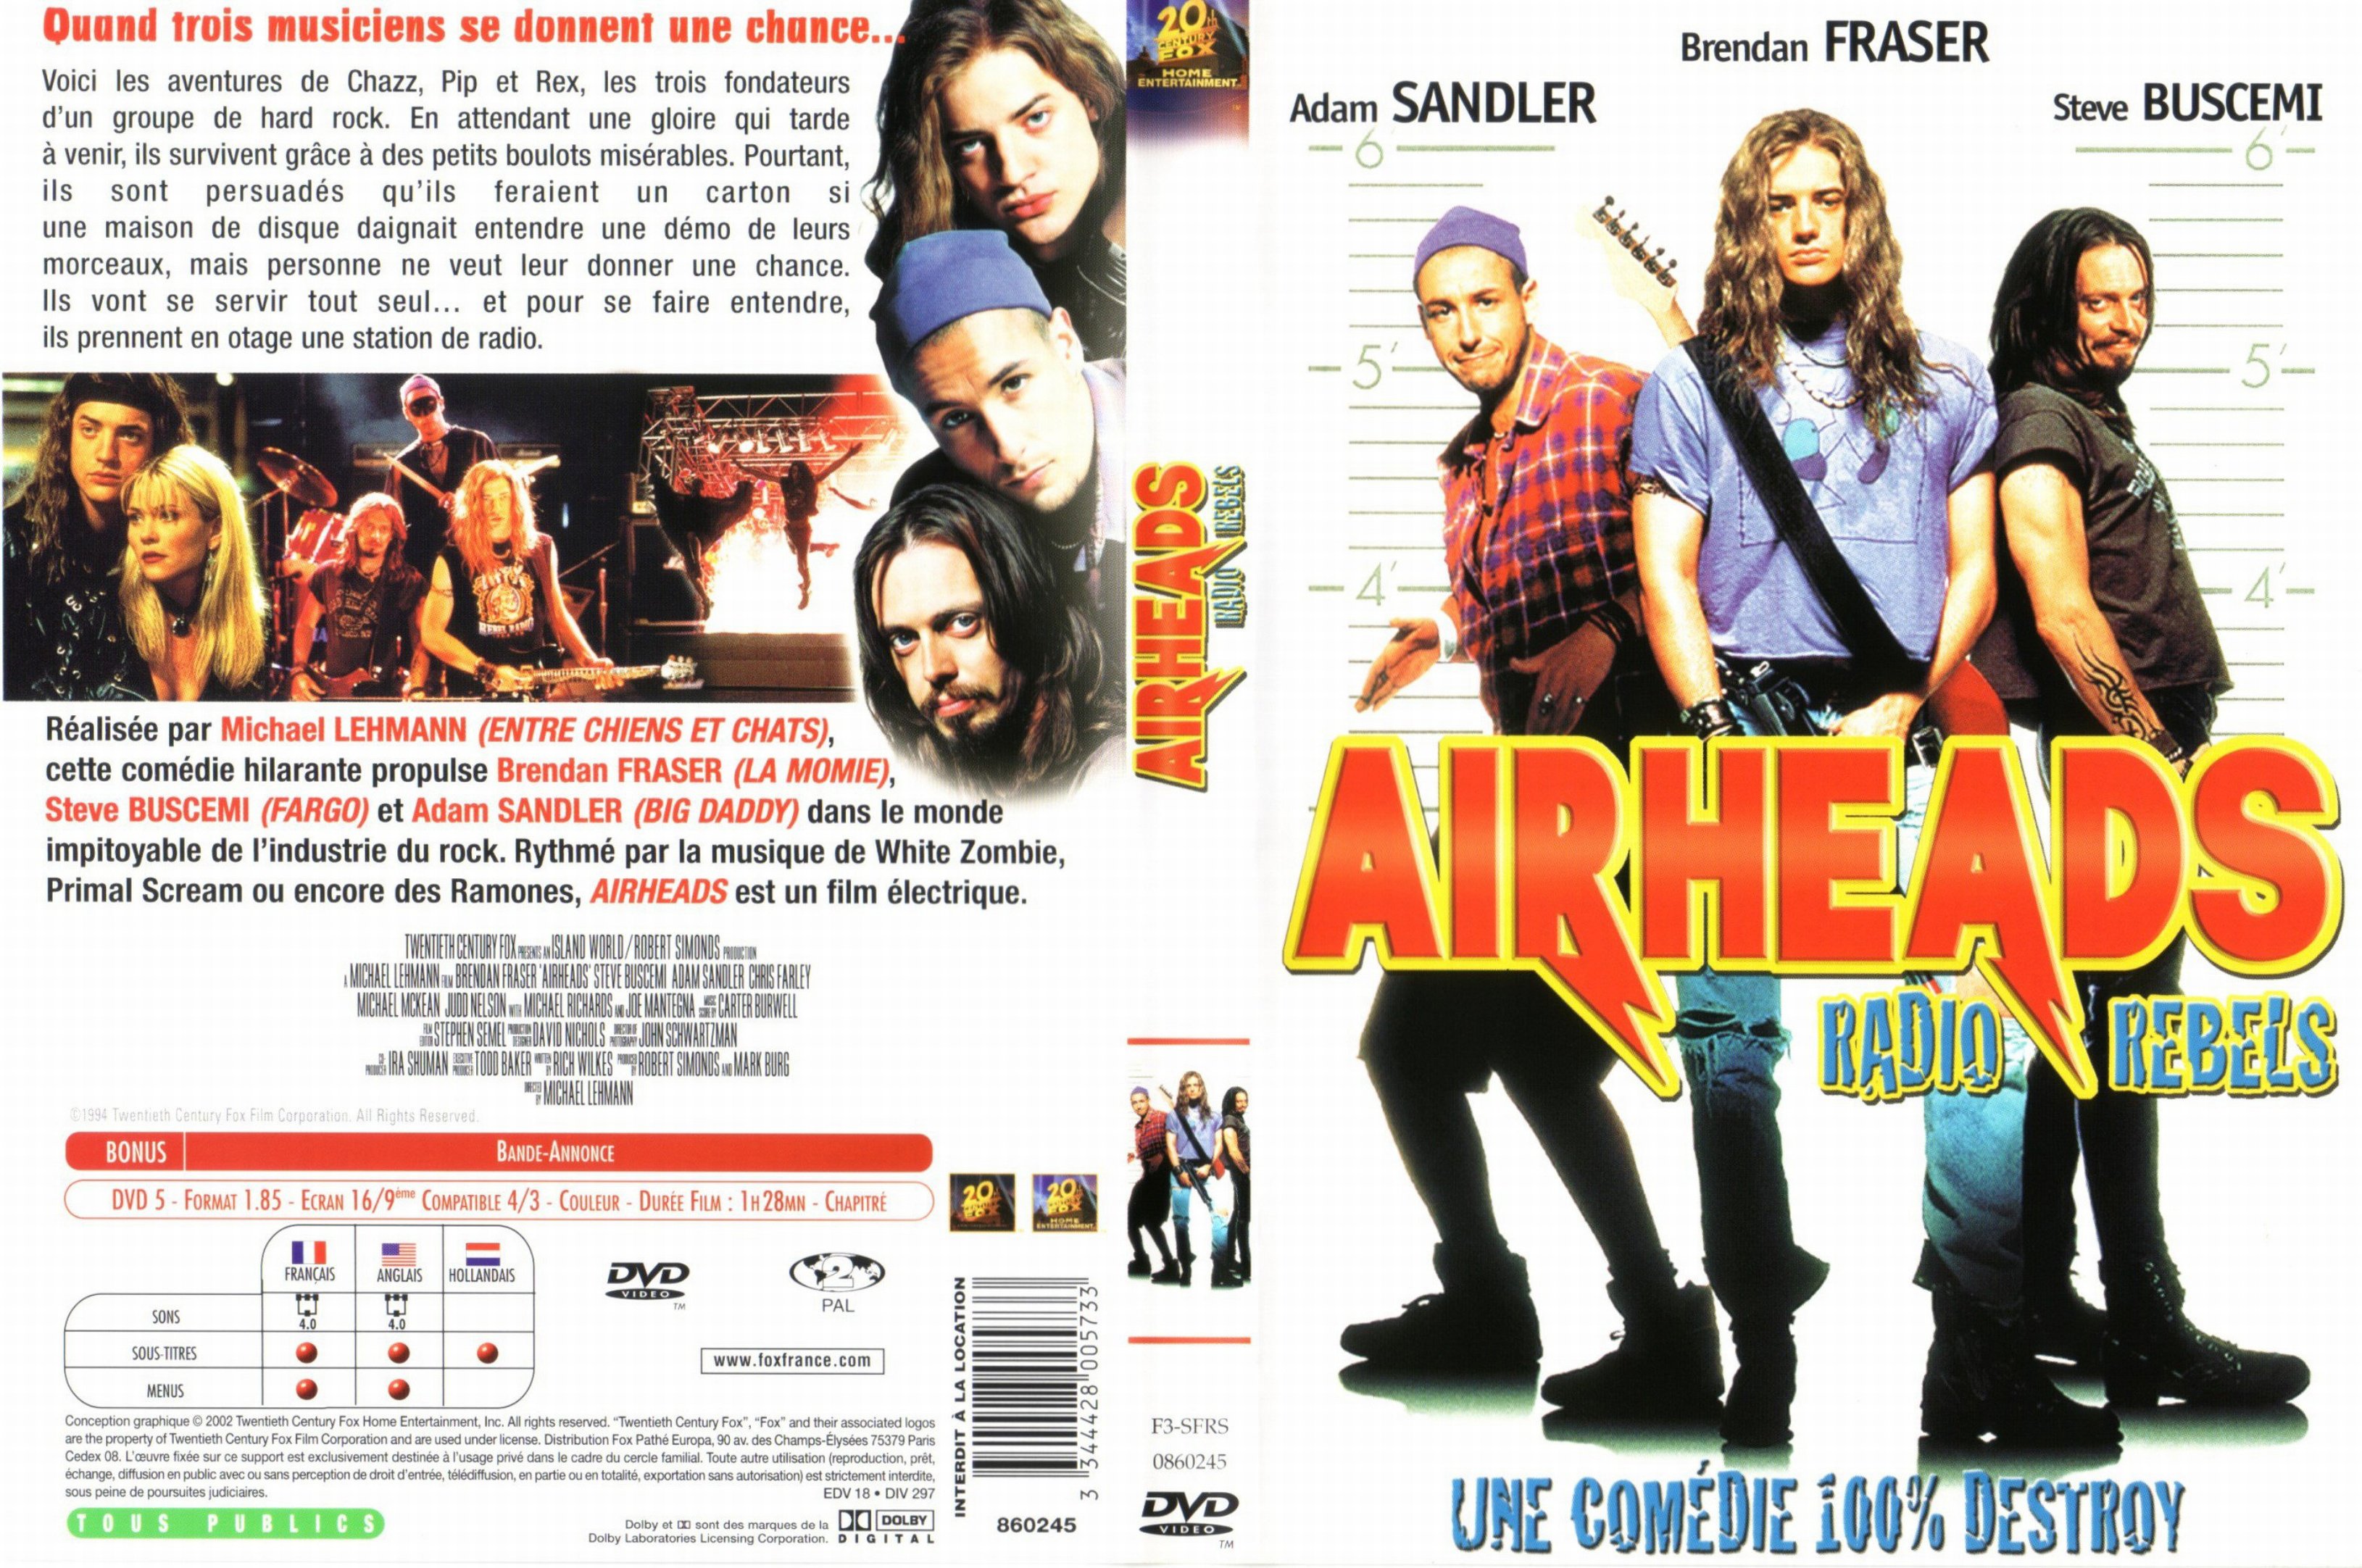 Jaquette DVD Airheads Radio Rebels